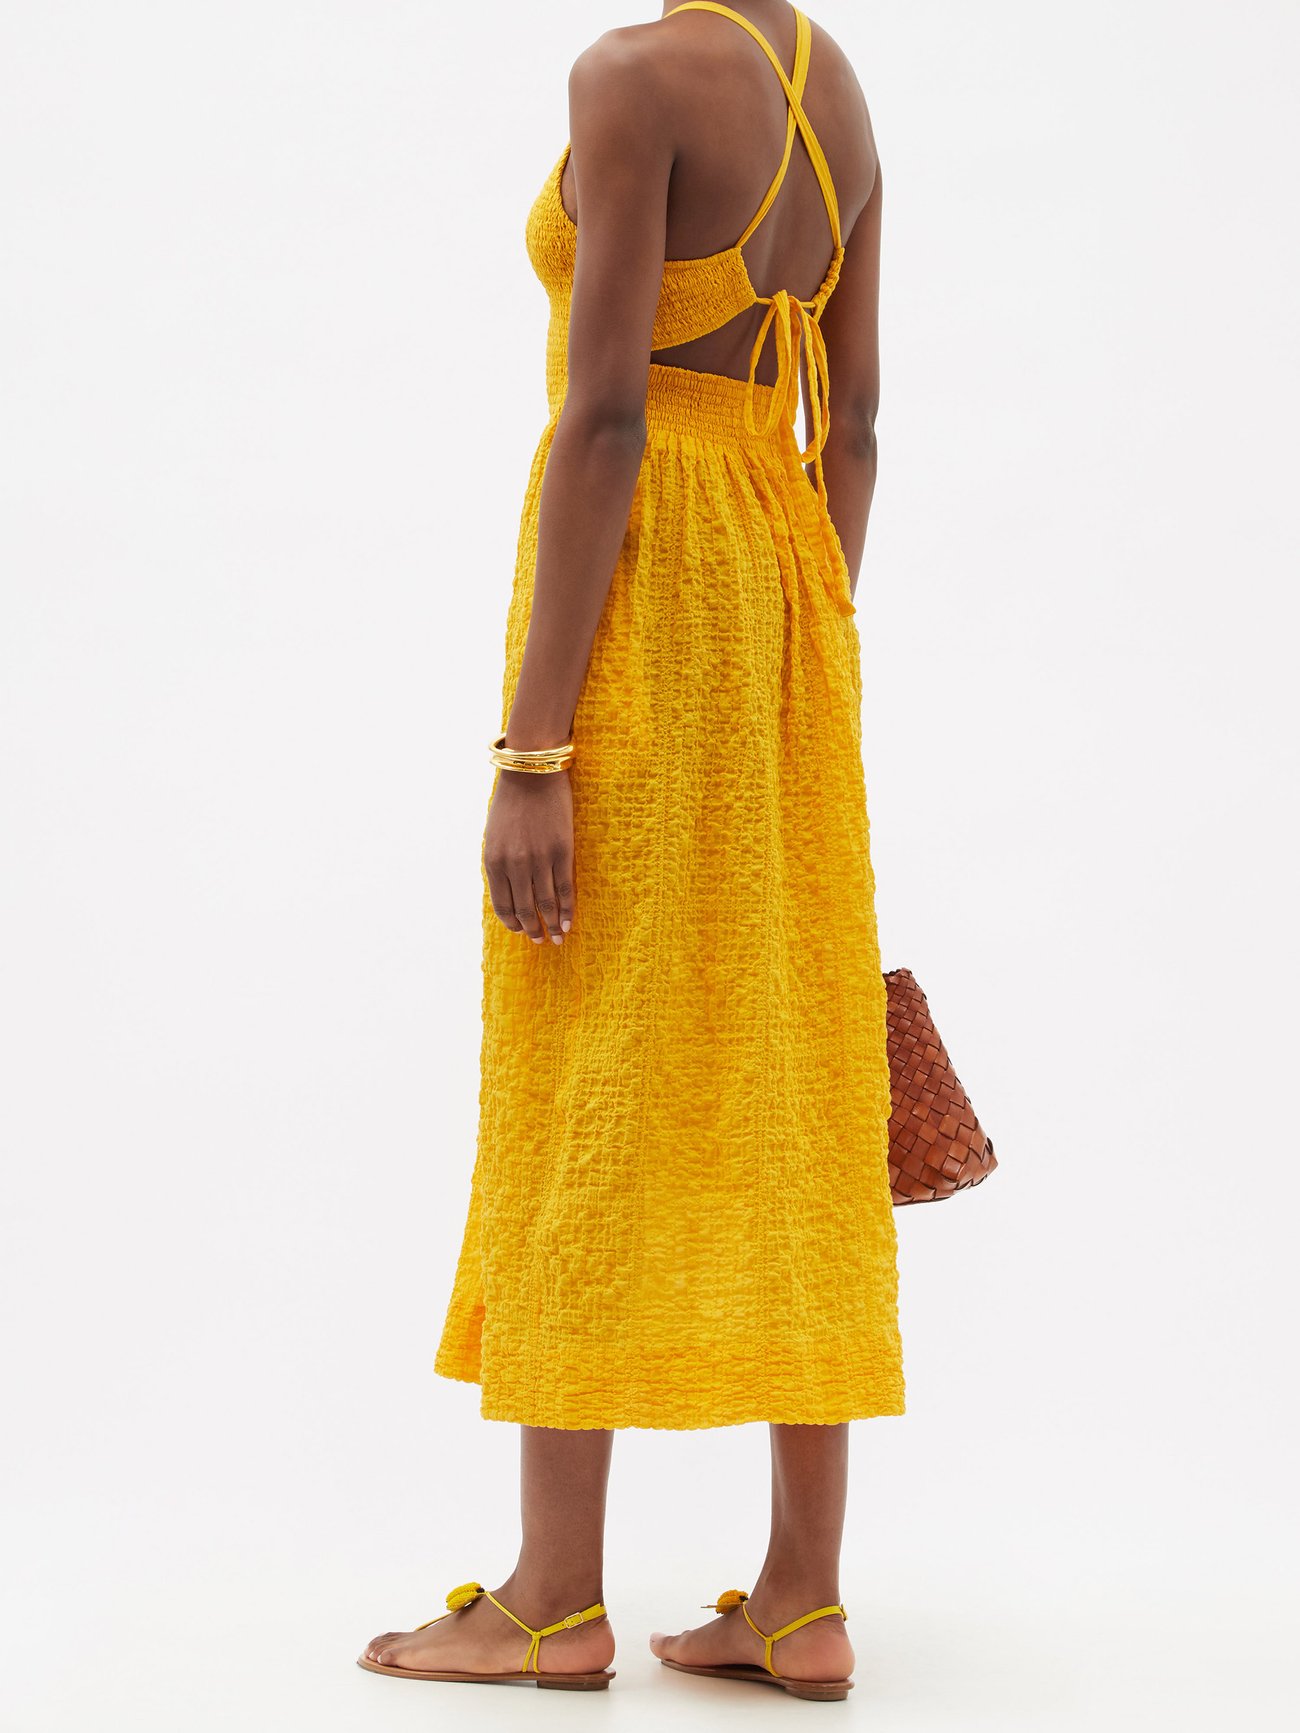 THREE GRACES LONDON Soleil tie back cotton-blend seersucker midi dress in yellow has a shirred bodie and ties at the open back. Relaxed fit midi skirt.